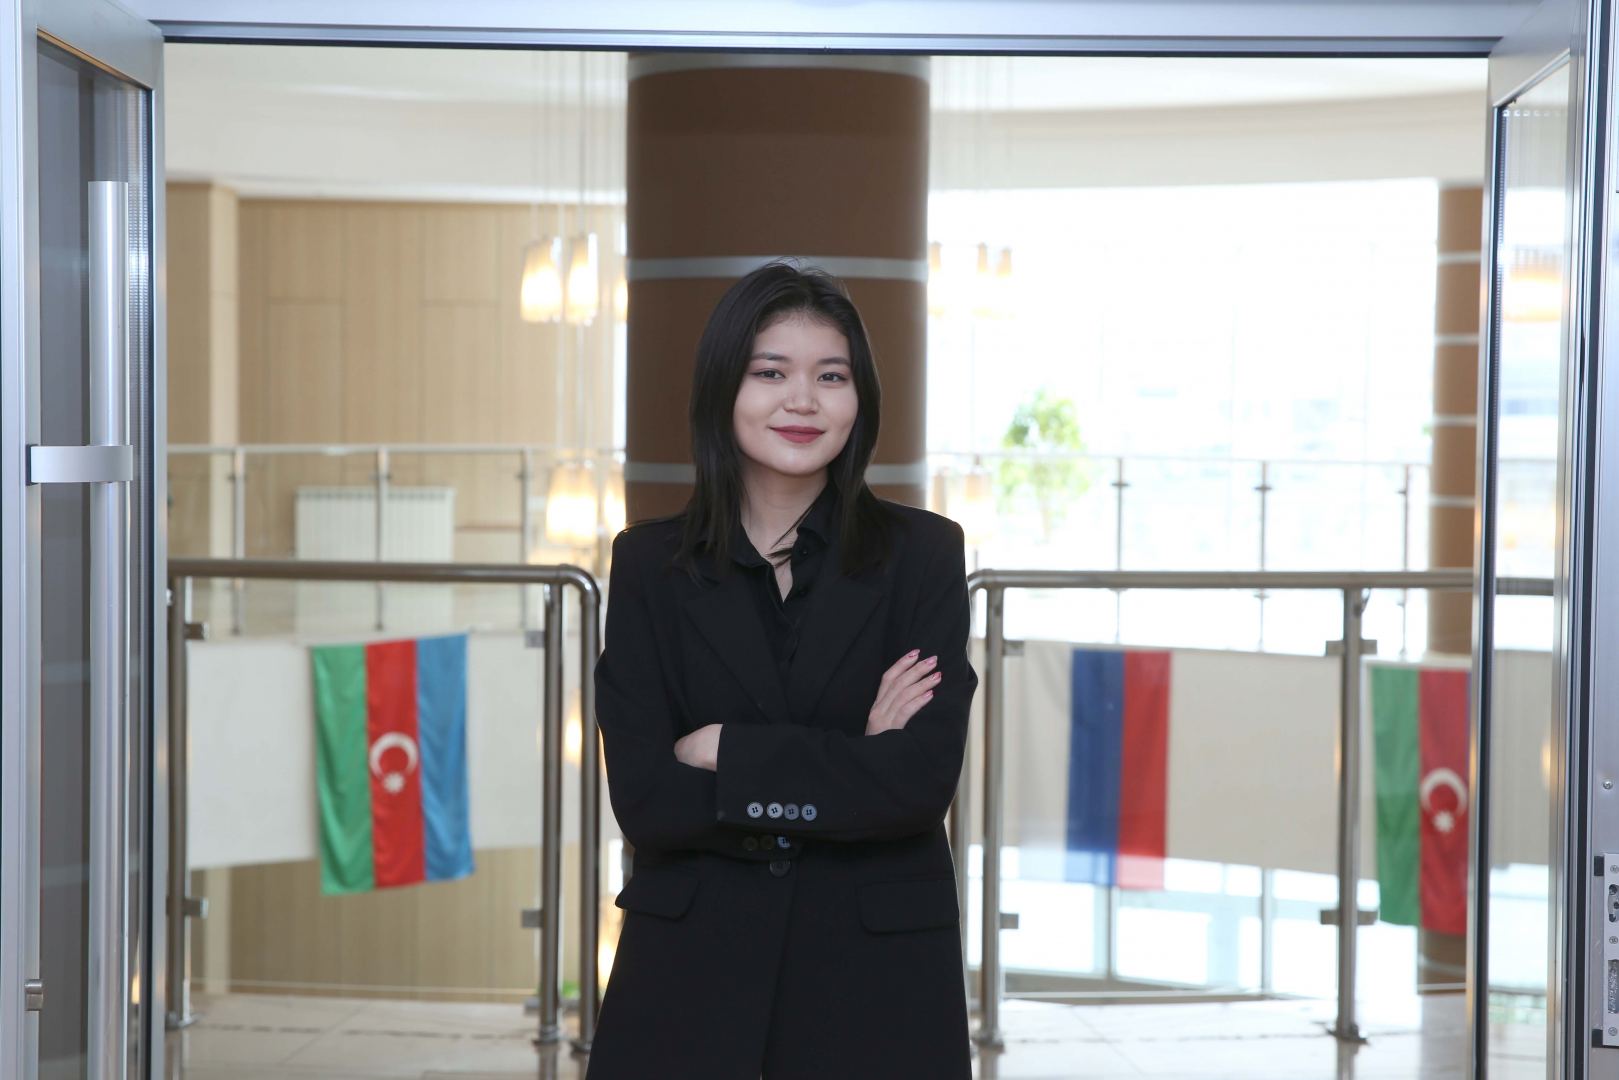 BHOS student from Kazakhstan: ‘This university opens up many opportunities for graduates’